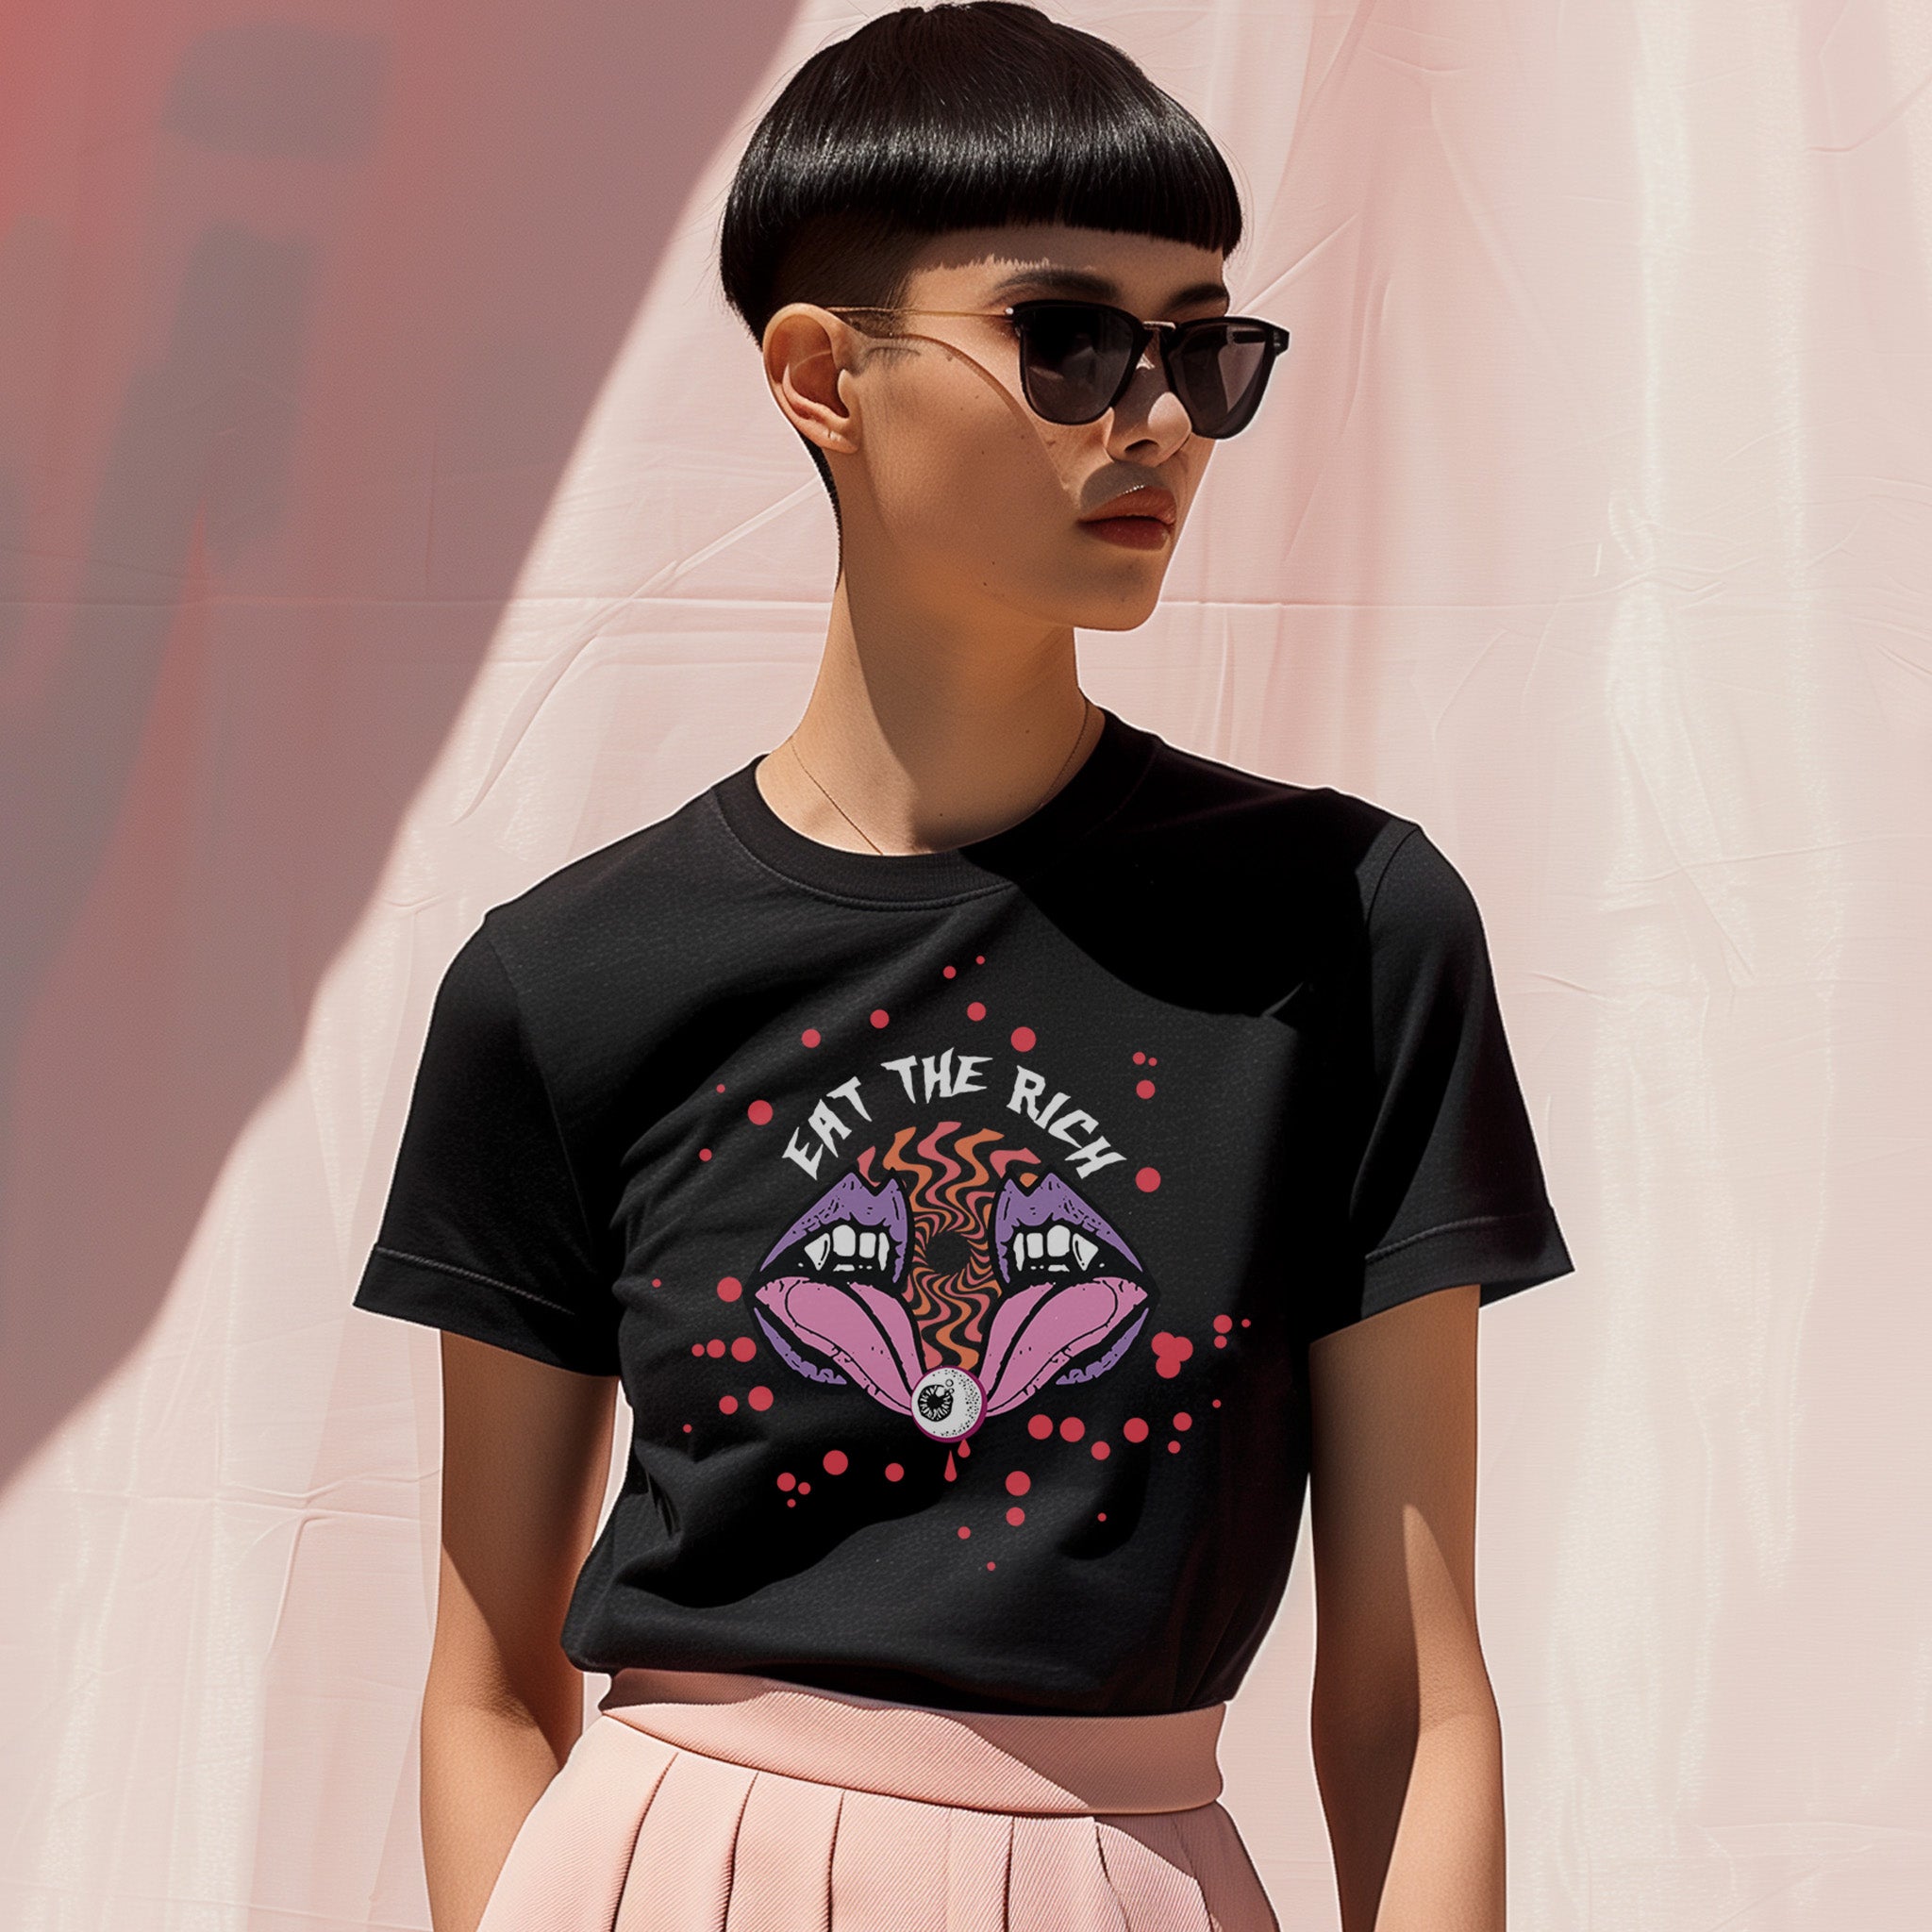 T-shirt featuring a surreal, psychedelic design centered on the chest. An open mouth with sharp vampire-like teeth and pink tongue dominates the image. Between the teeth, a hypnotic swirling pattern in rainbow colors leads to a single eyeball on the tongue. 